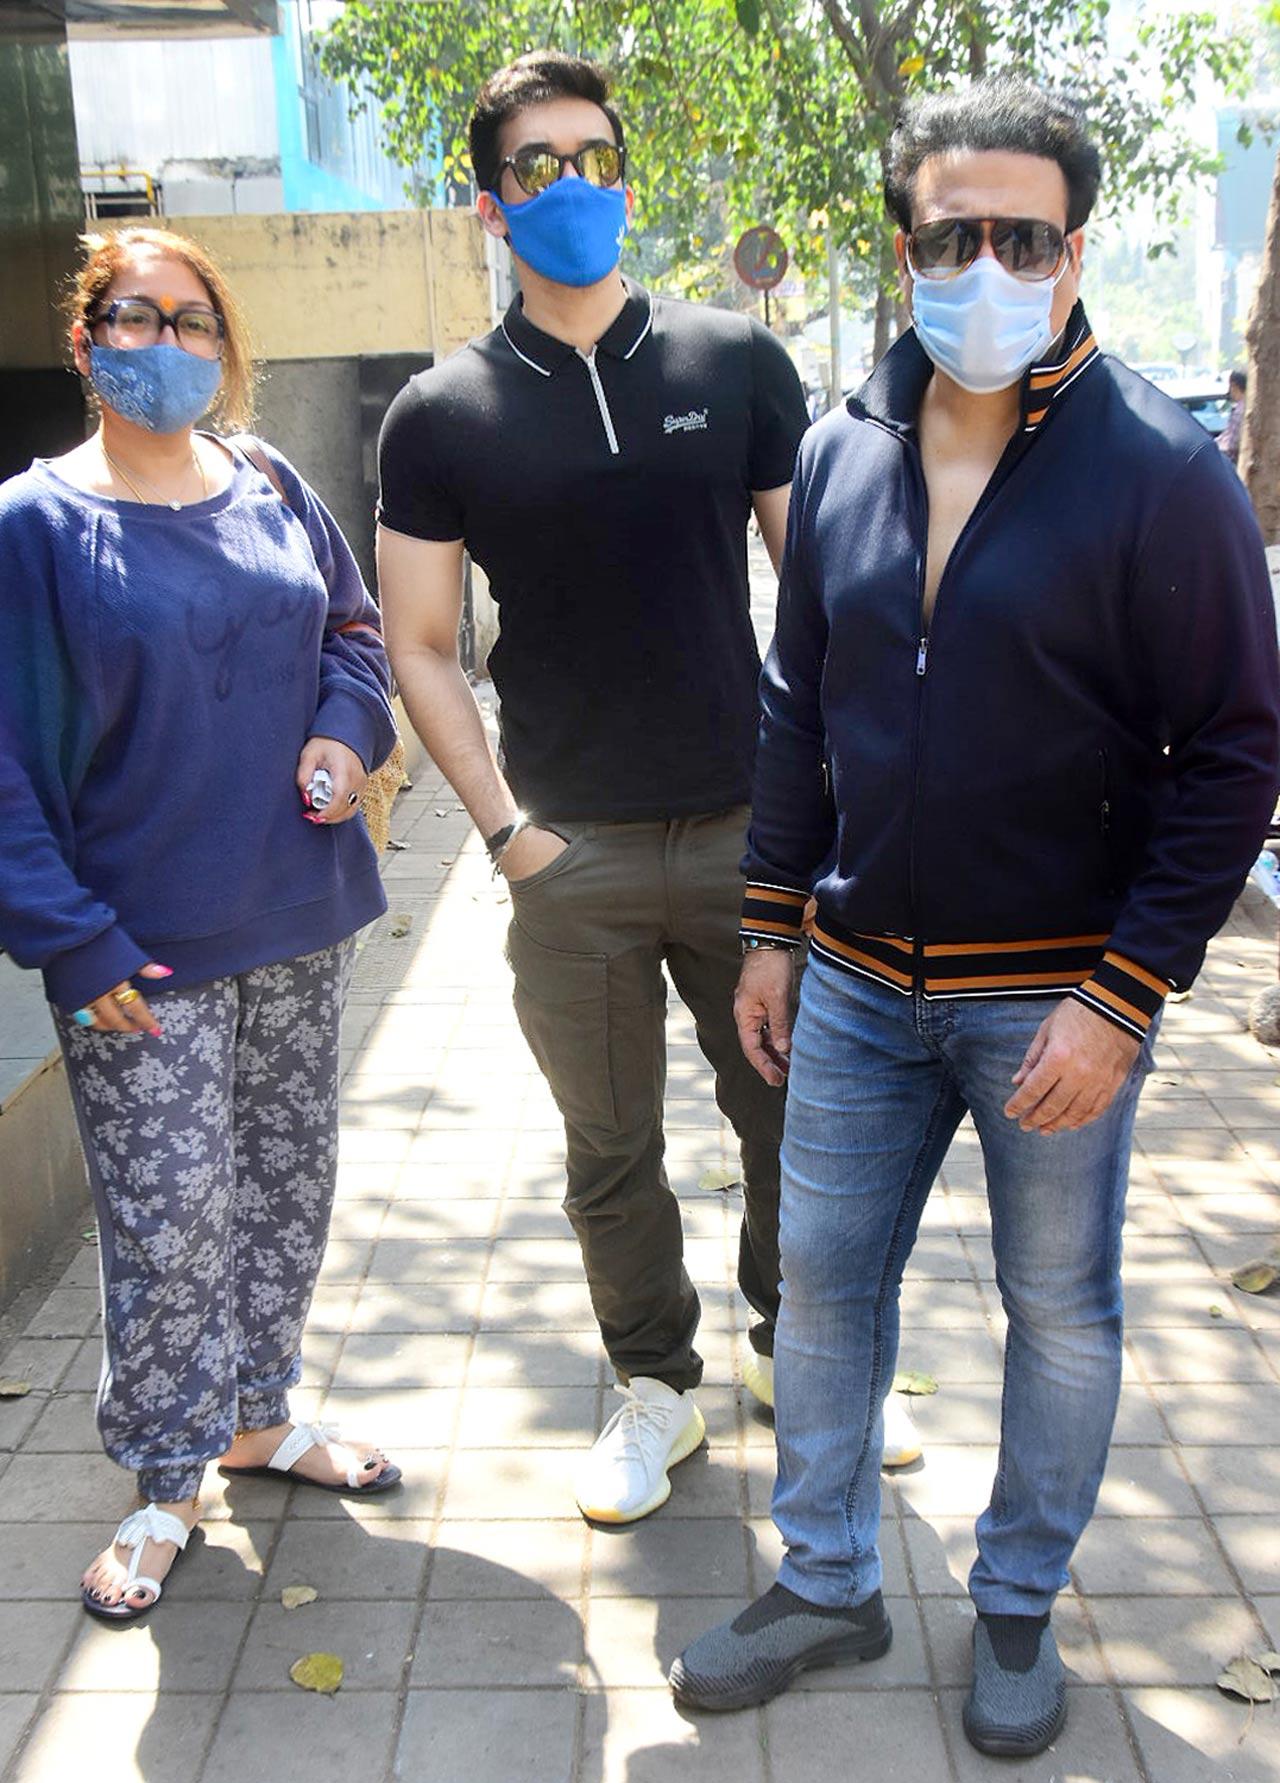 Govinda posed for the shutterbugs when clicked in Bandra with the family. Speaking about the actor, Govinda was said to reunite with Salman Khan for Partner 2, but there are no reports from the makers so far.